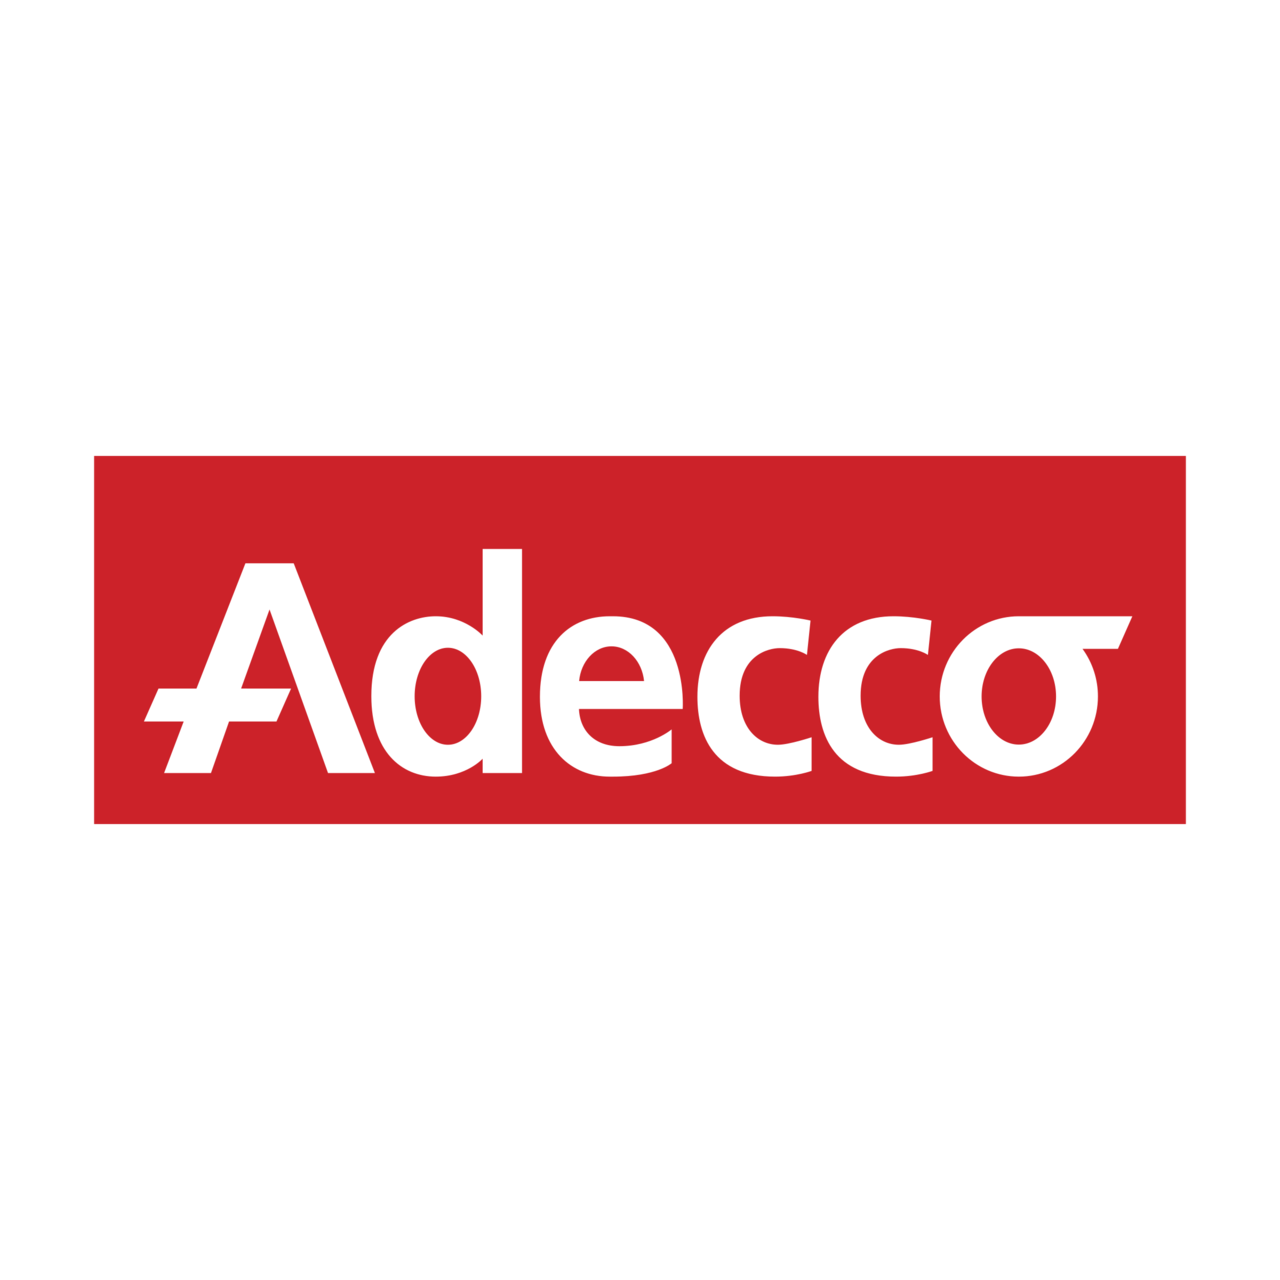 adecco-logo.png